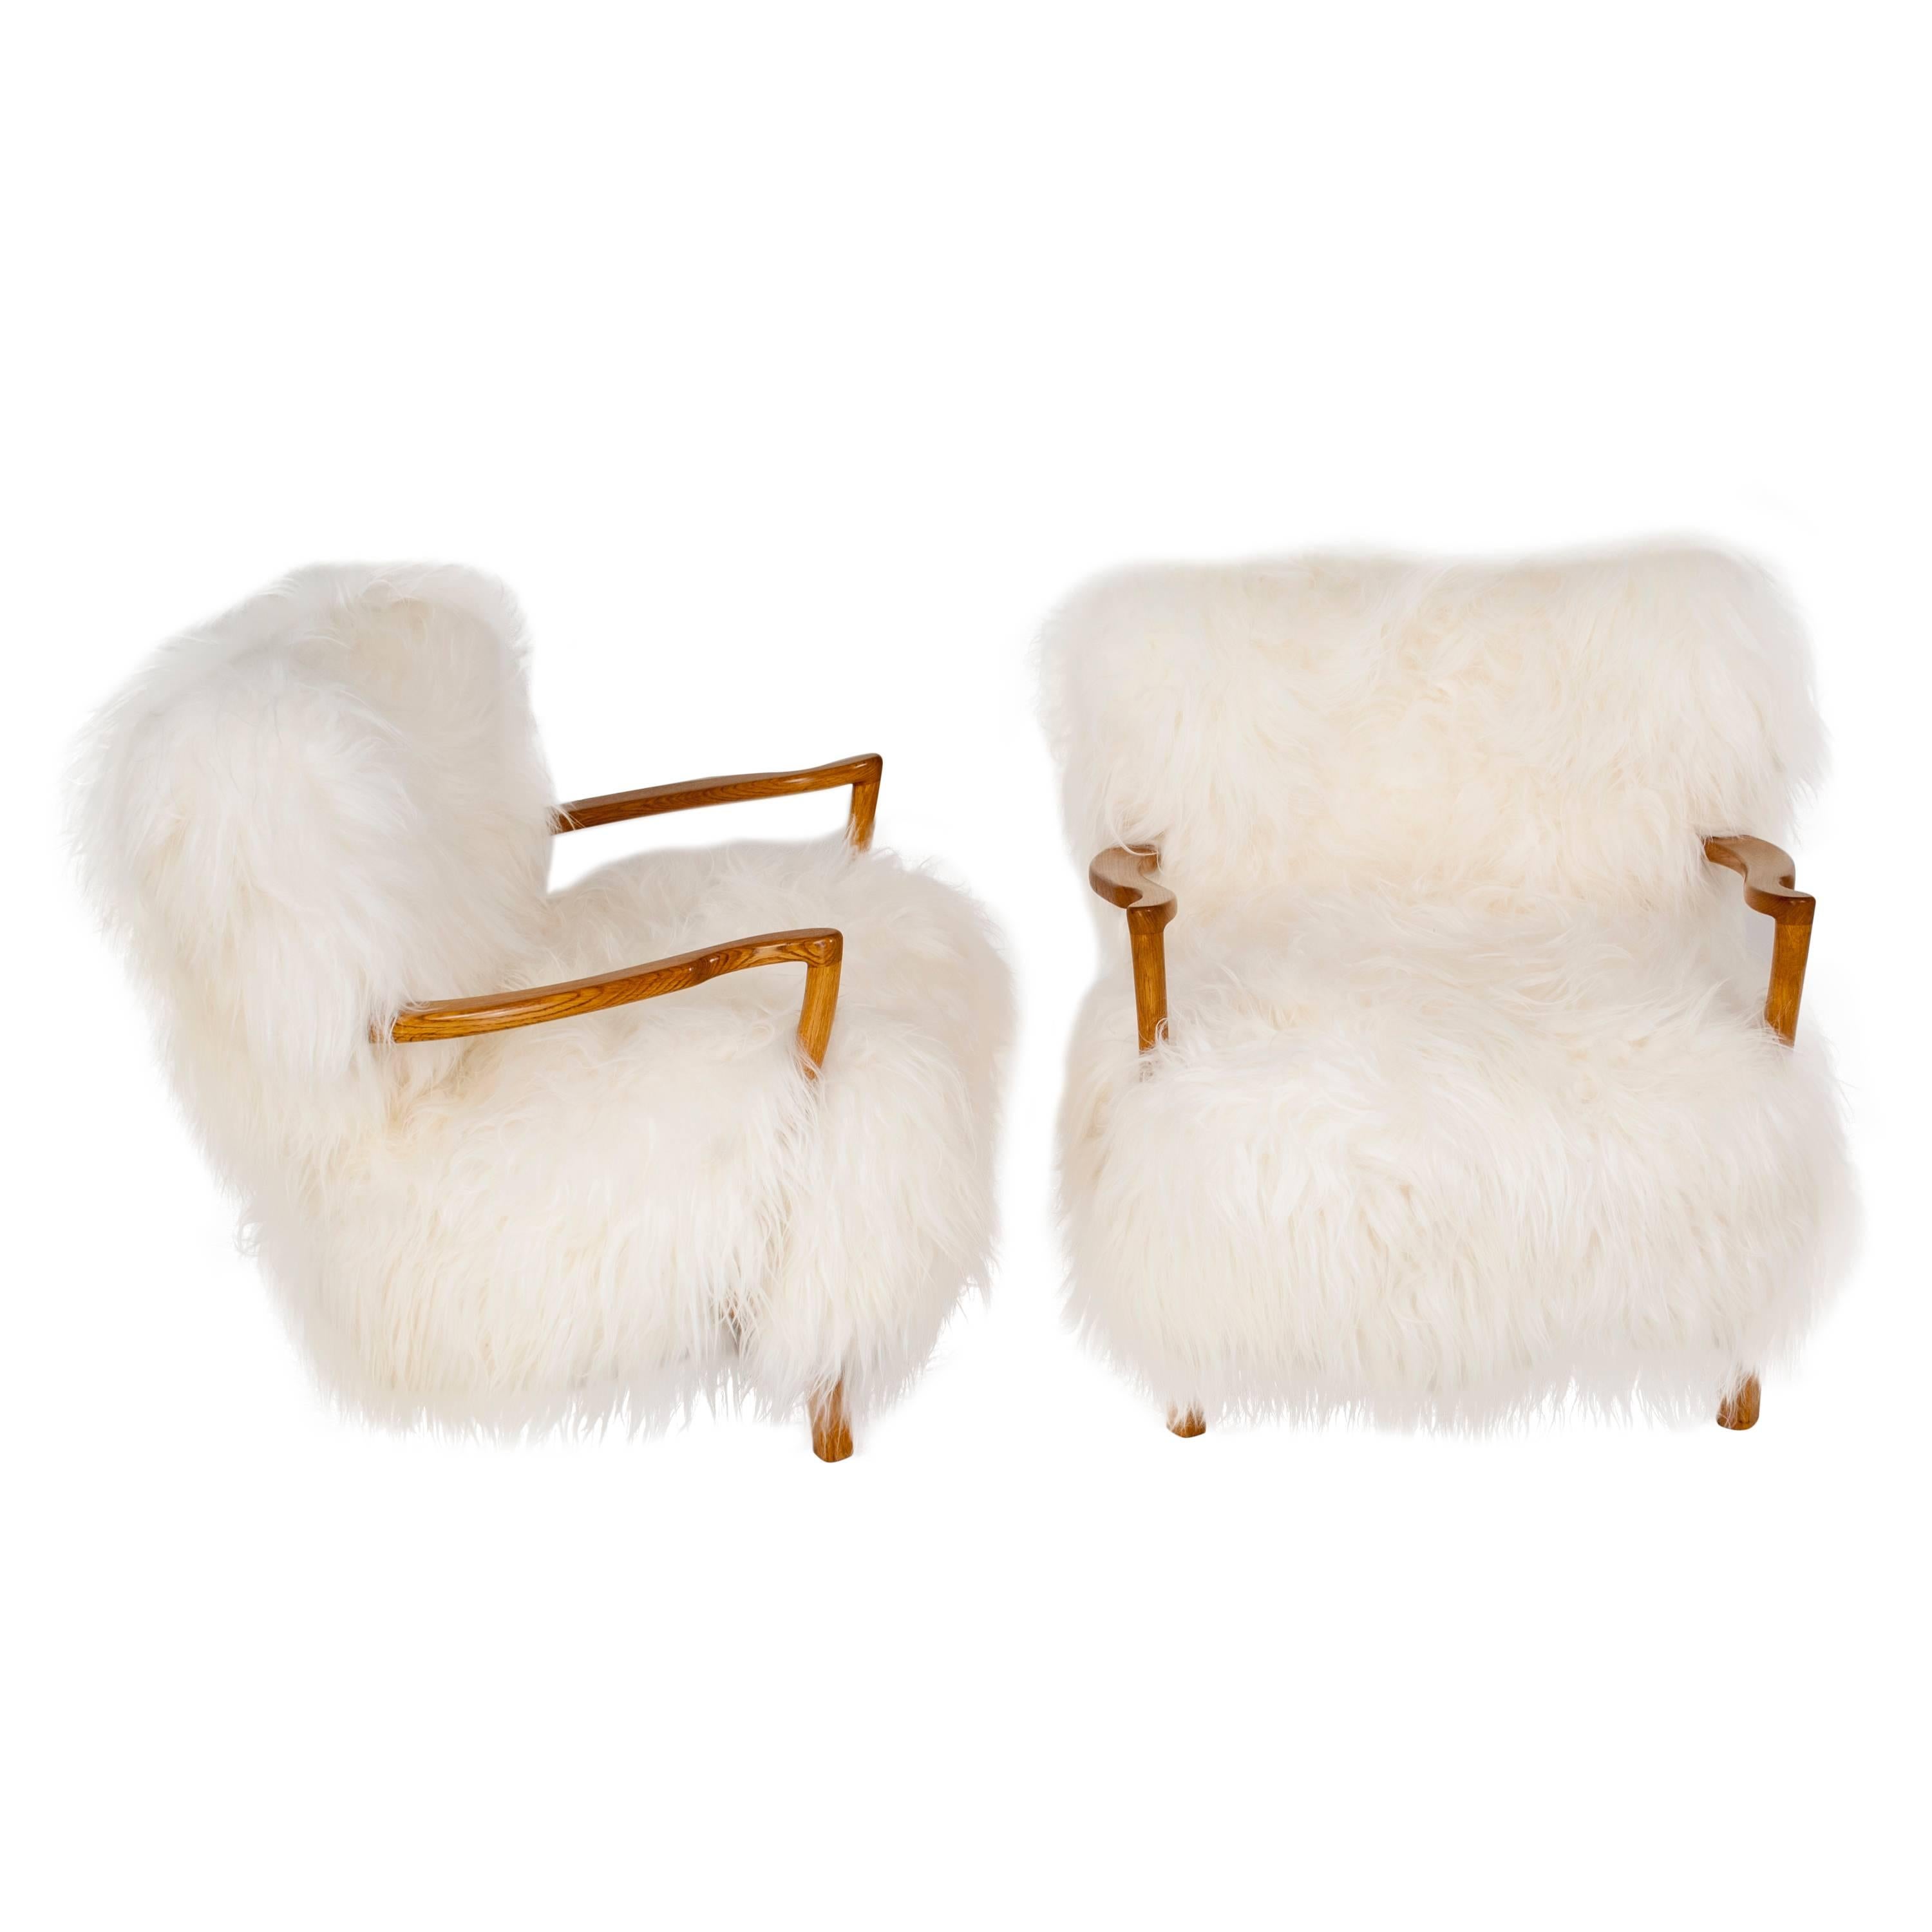 Fritz Schlegel (attributed) Pair of Easy Chairs in sheepskin and oak For Sale